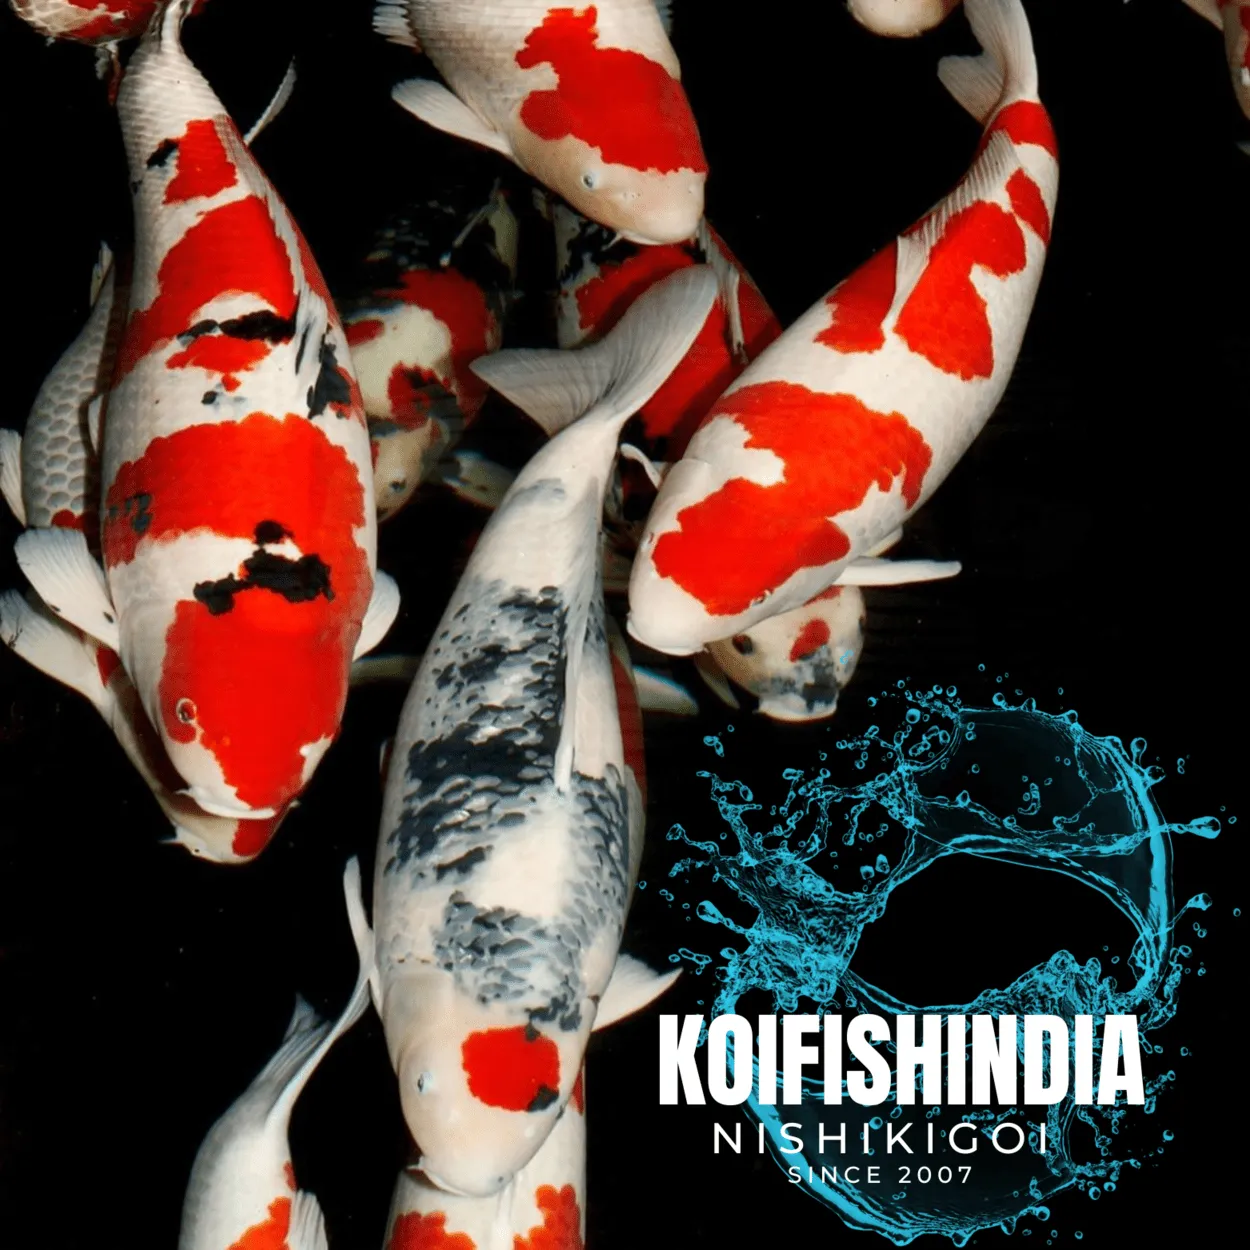 Buy original Japanese Koi fish online in India from our online